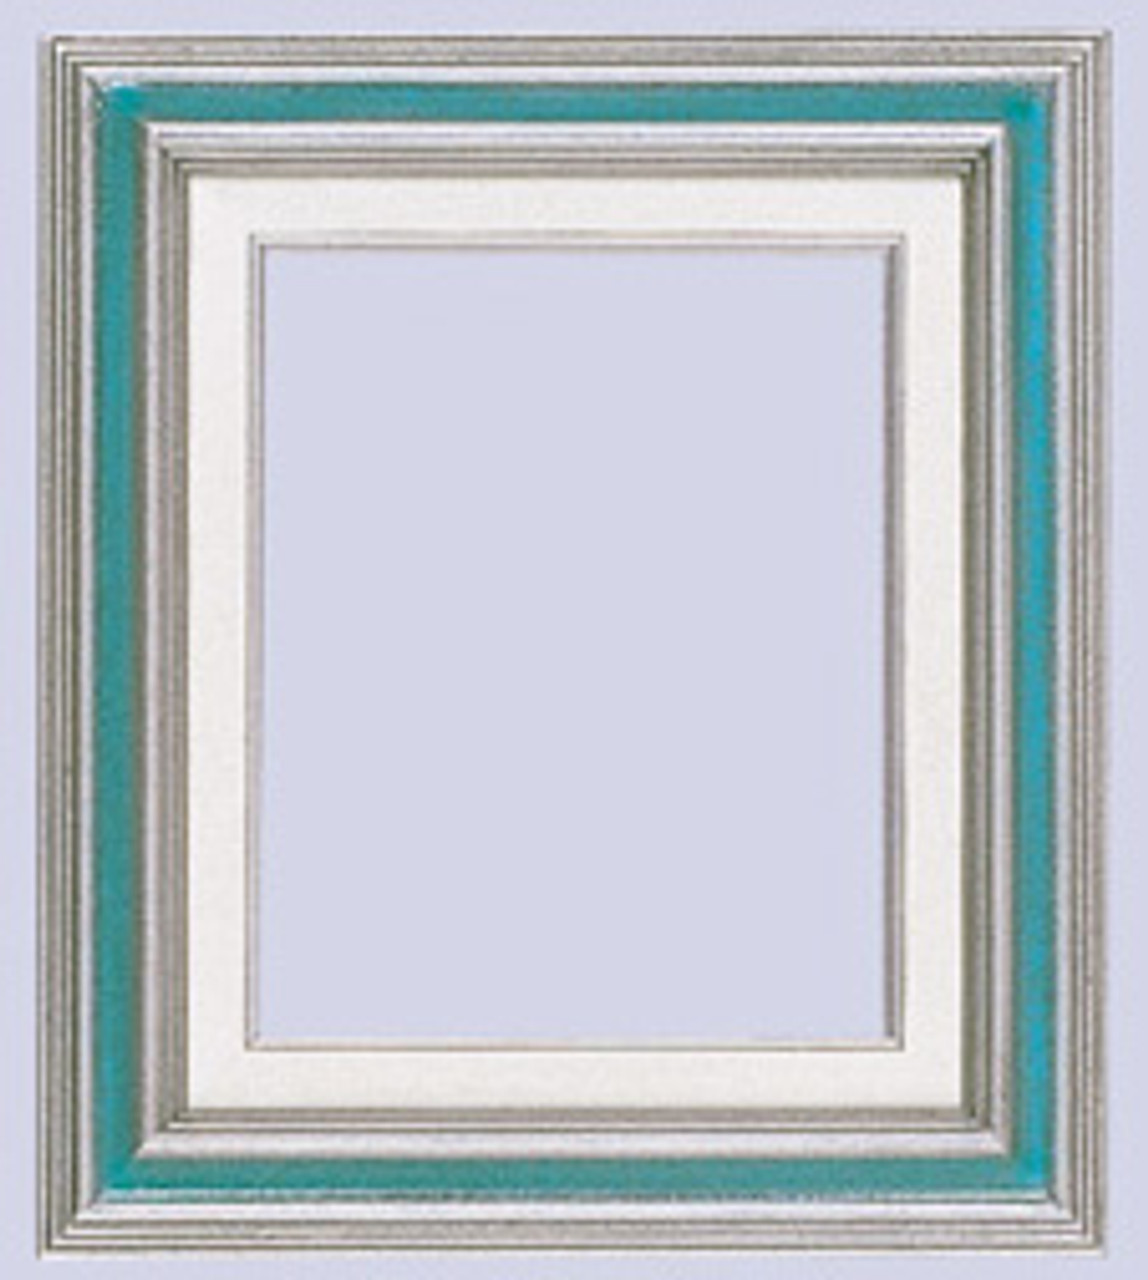  3 Inch Econo Wood Frames With Linen Liners: 14X22*